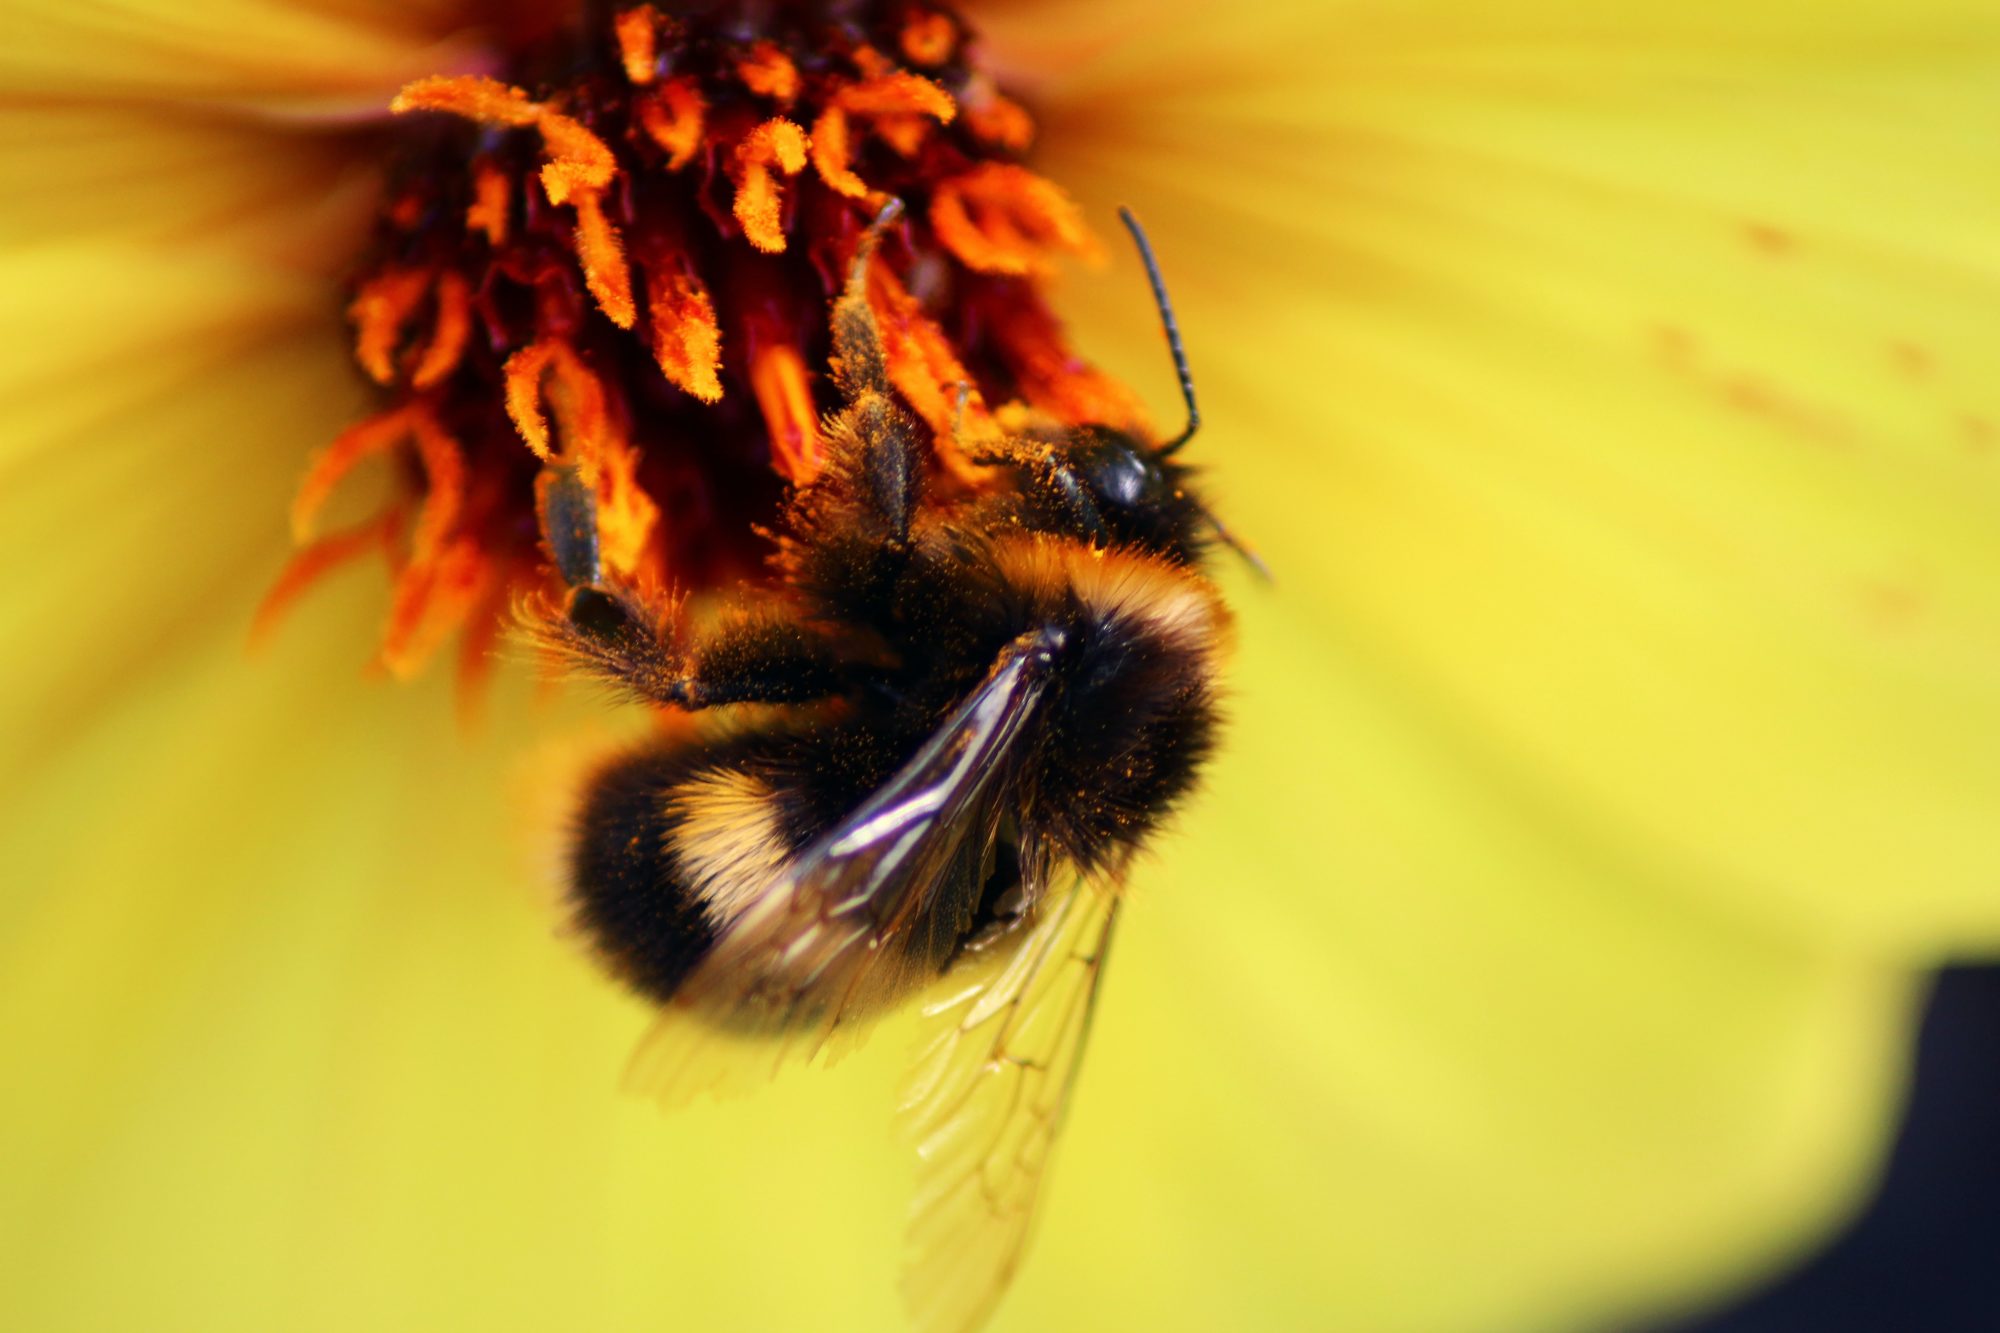 Don't go to the emergency for a bee sting if it's not life threatening! Let us help.